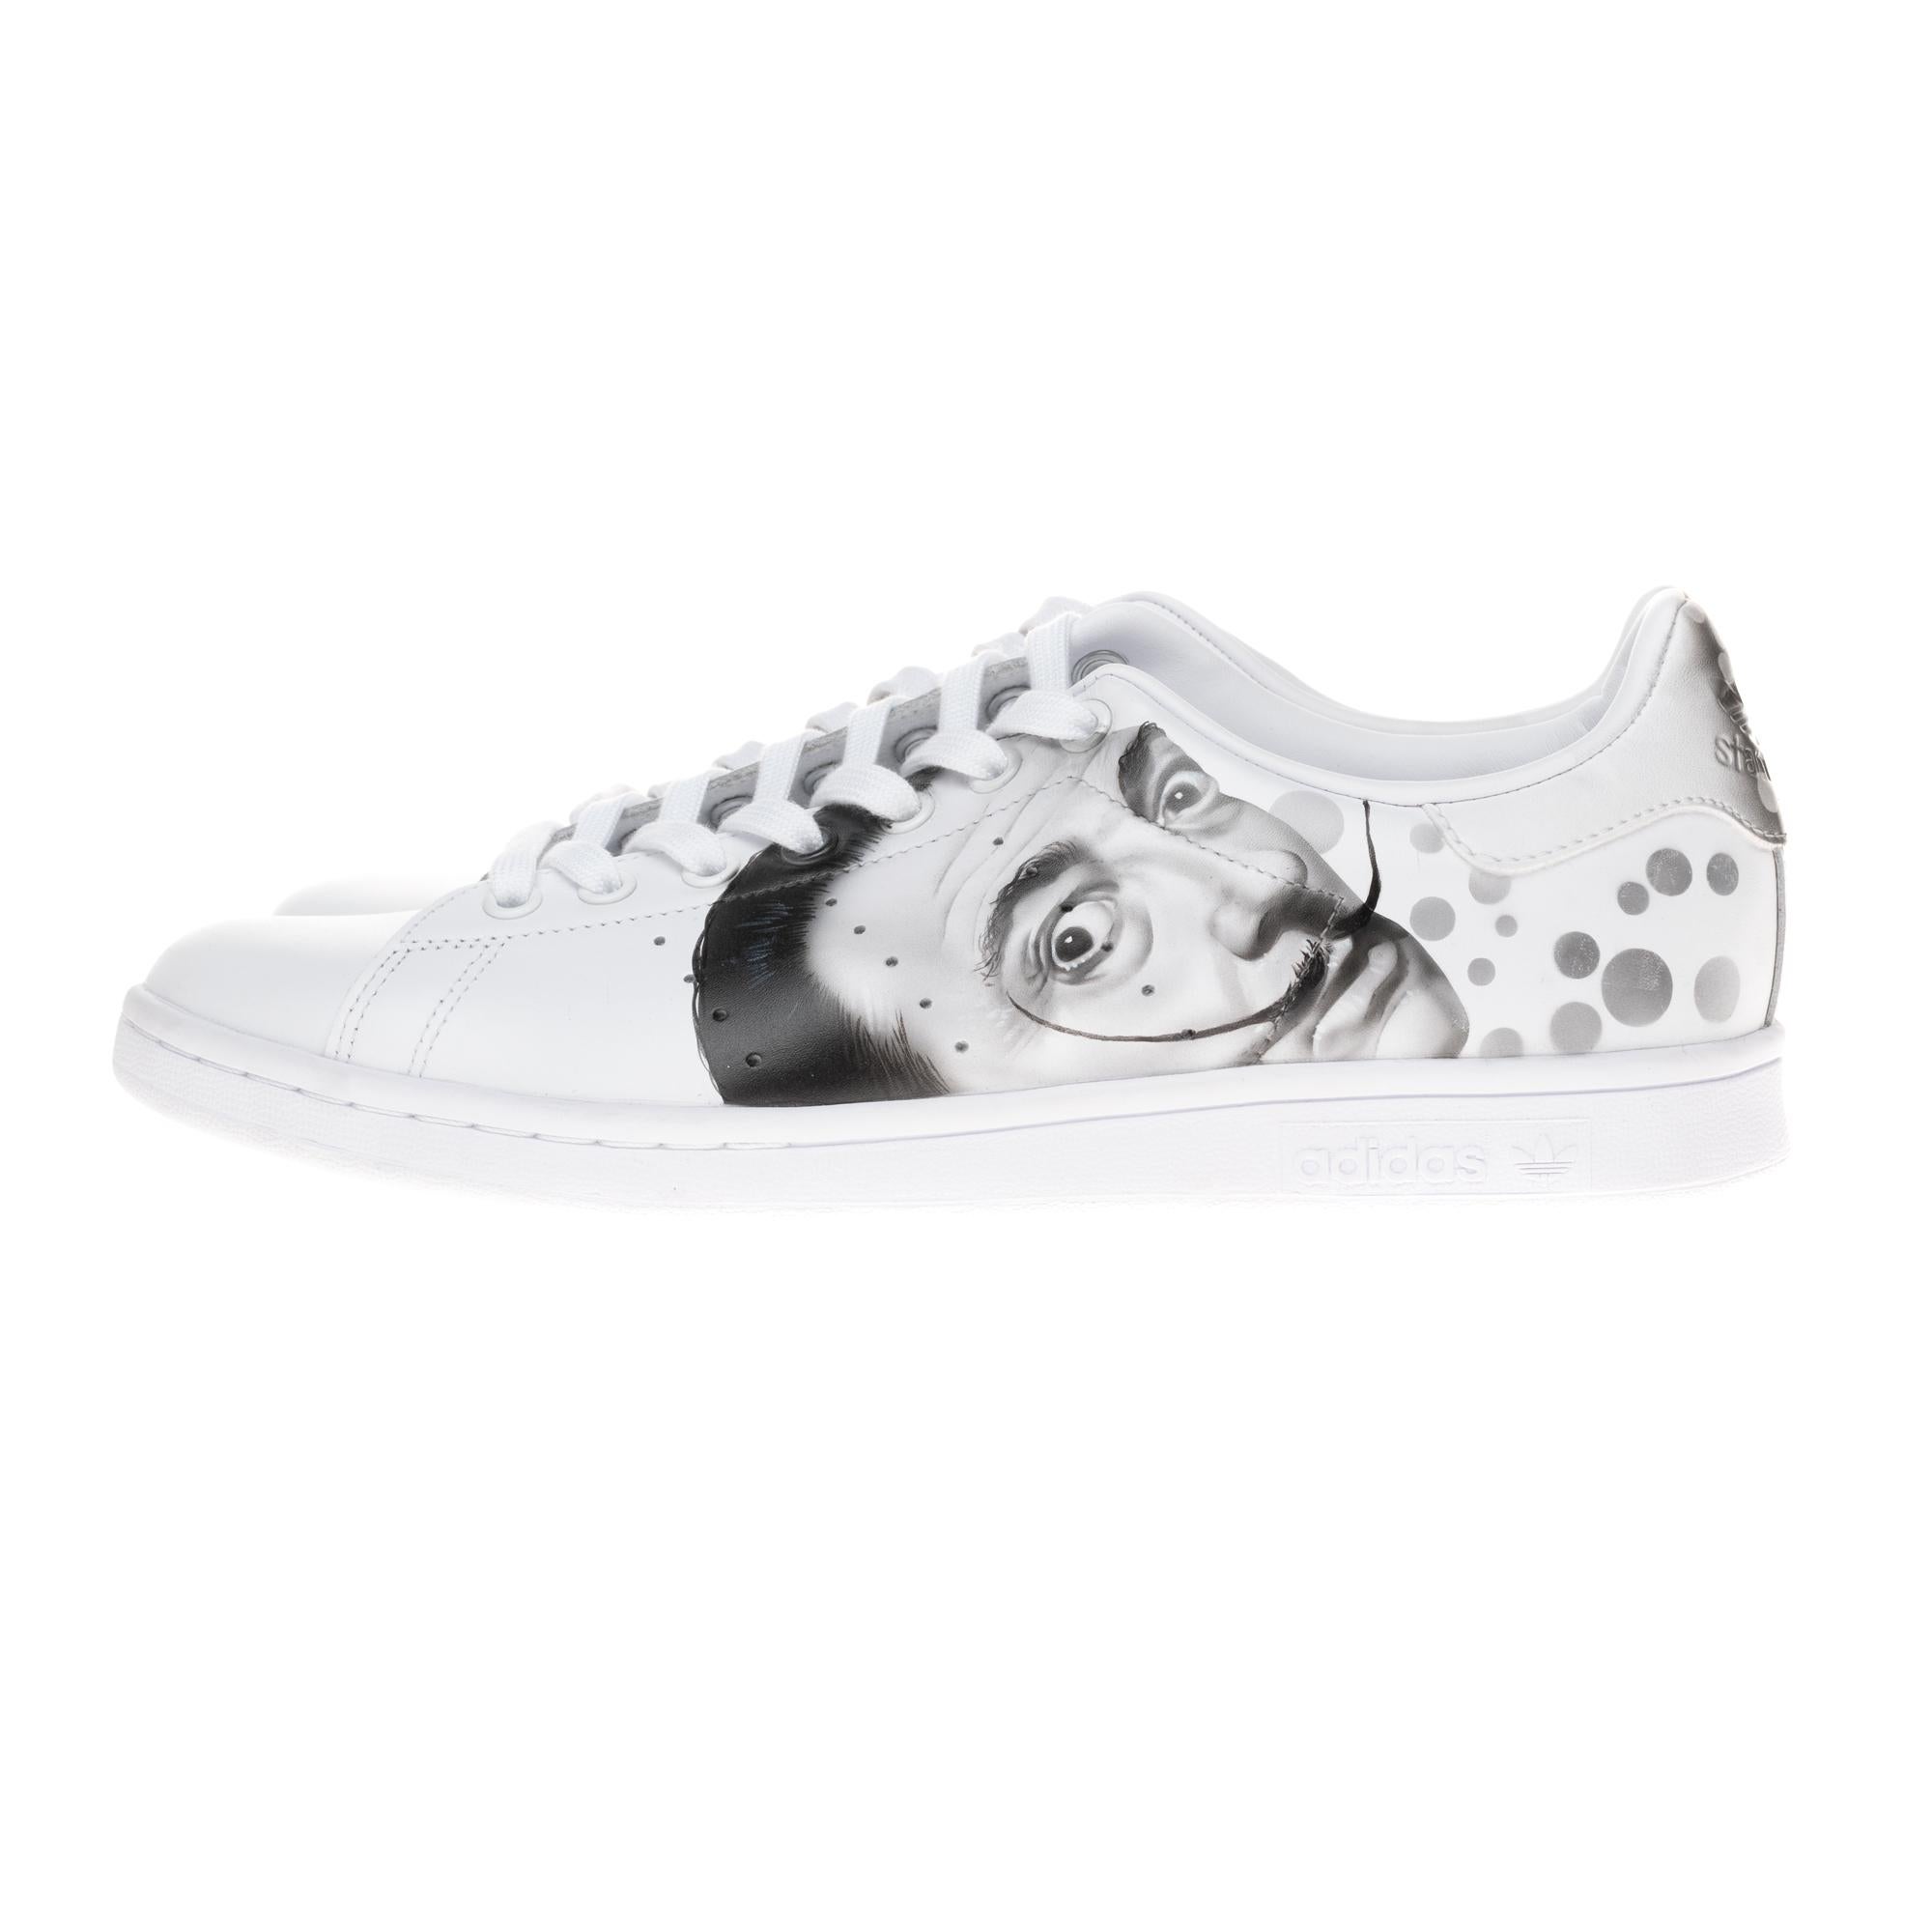 Brand New Adidas Stan Smith All White sneakers customized "Dali" by Patbo  For Sale at 1stDibs